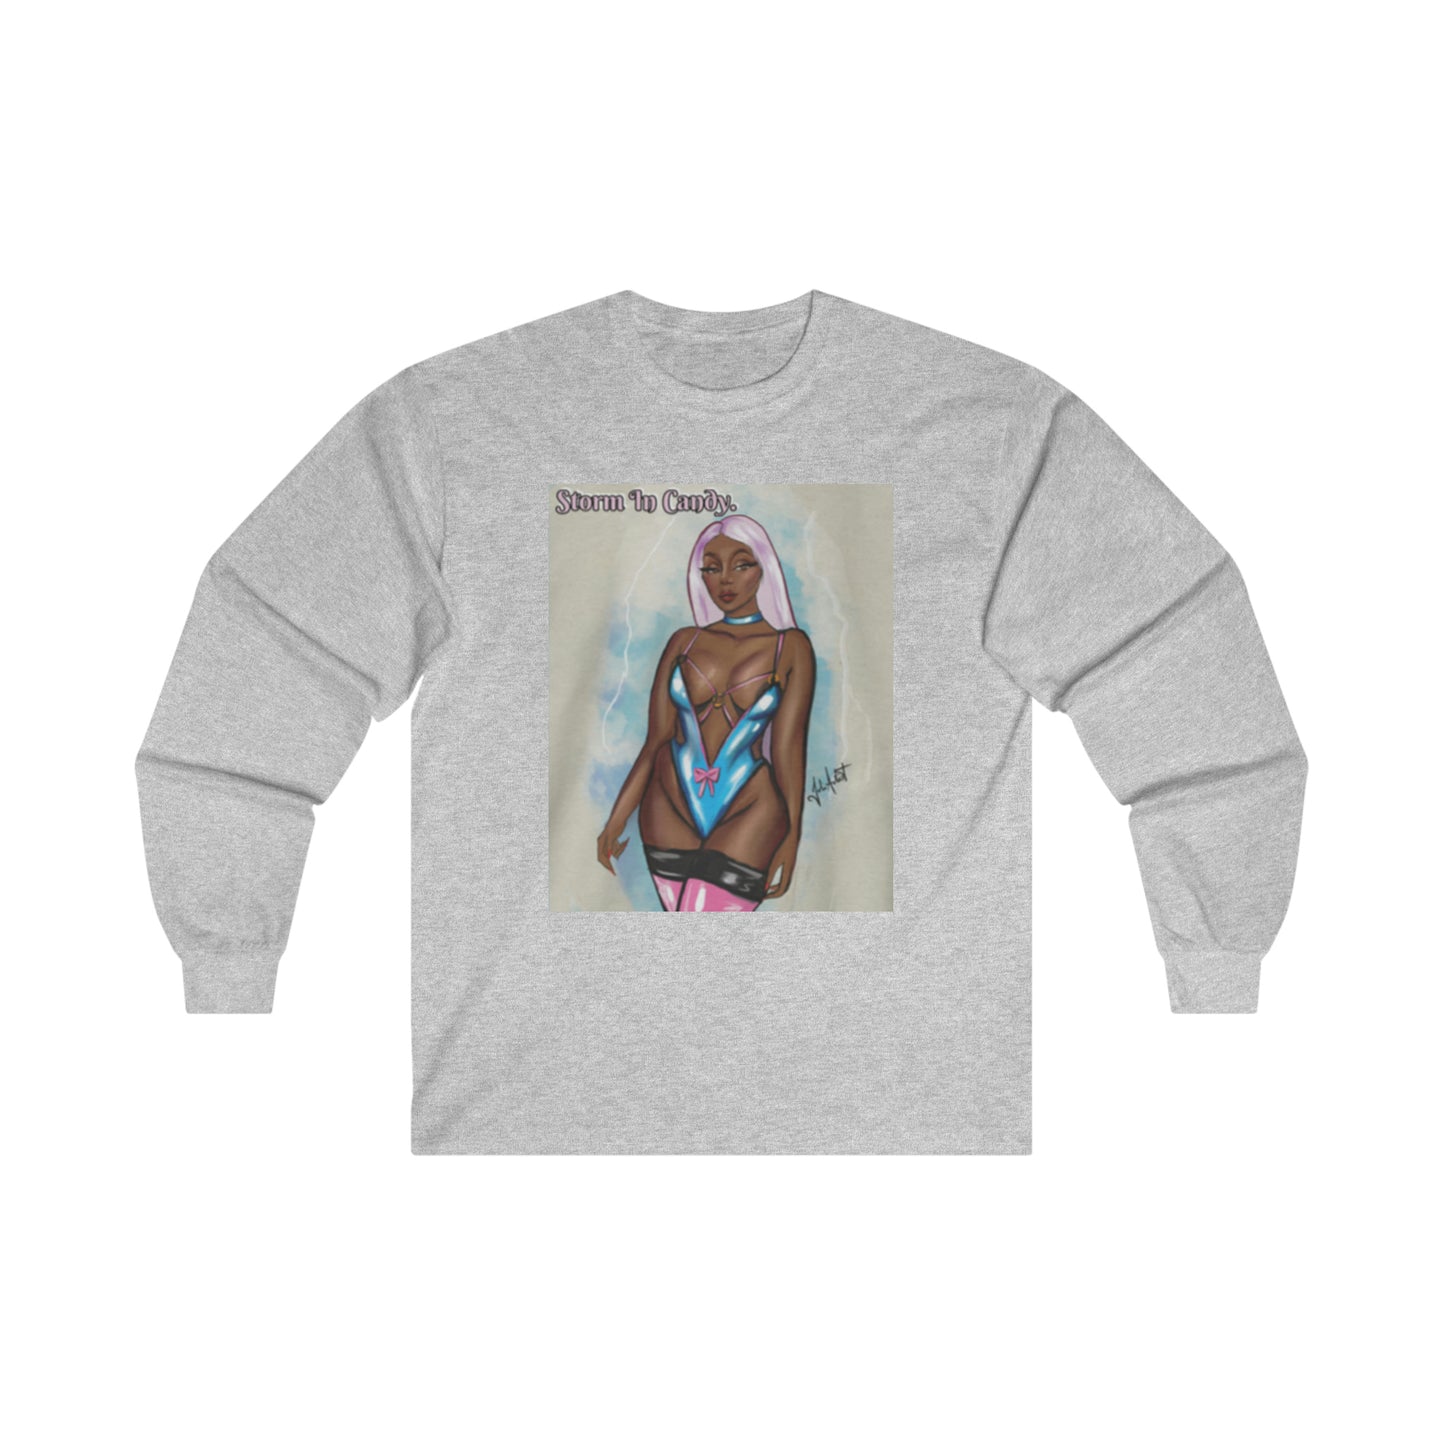 Storm In Candy - Unisex Long Sleeve Tee